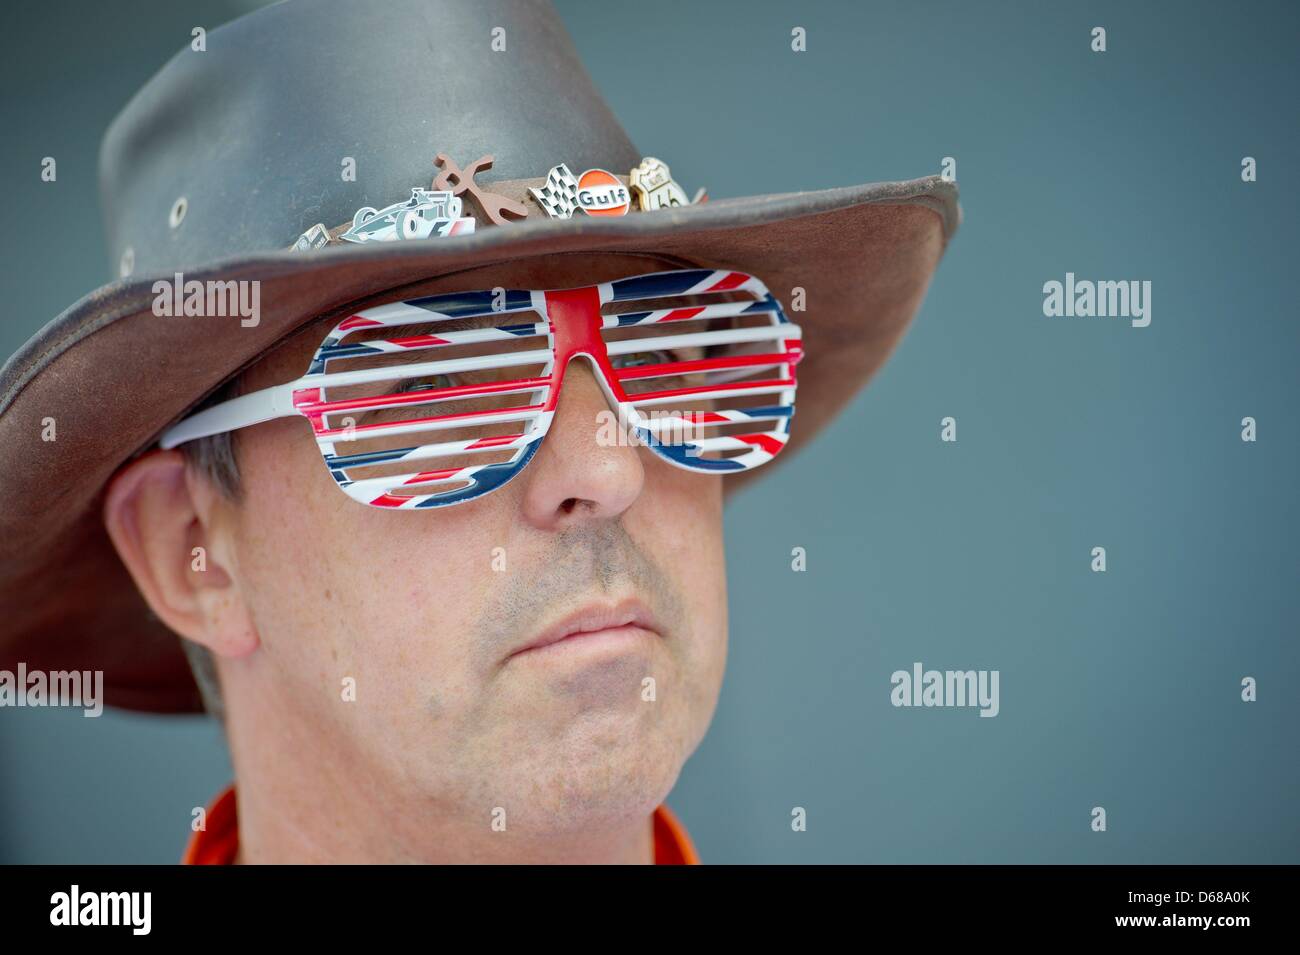 A Marshal wears glasses in a British design during the Grand Prix of Great Britain at the Silverstone race track in Northamptonshire, Great Britain, 08 July 2012. Photo: David Ebener dpa  +++(c) dpa - Bildfunk+++ Stock Photo